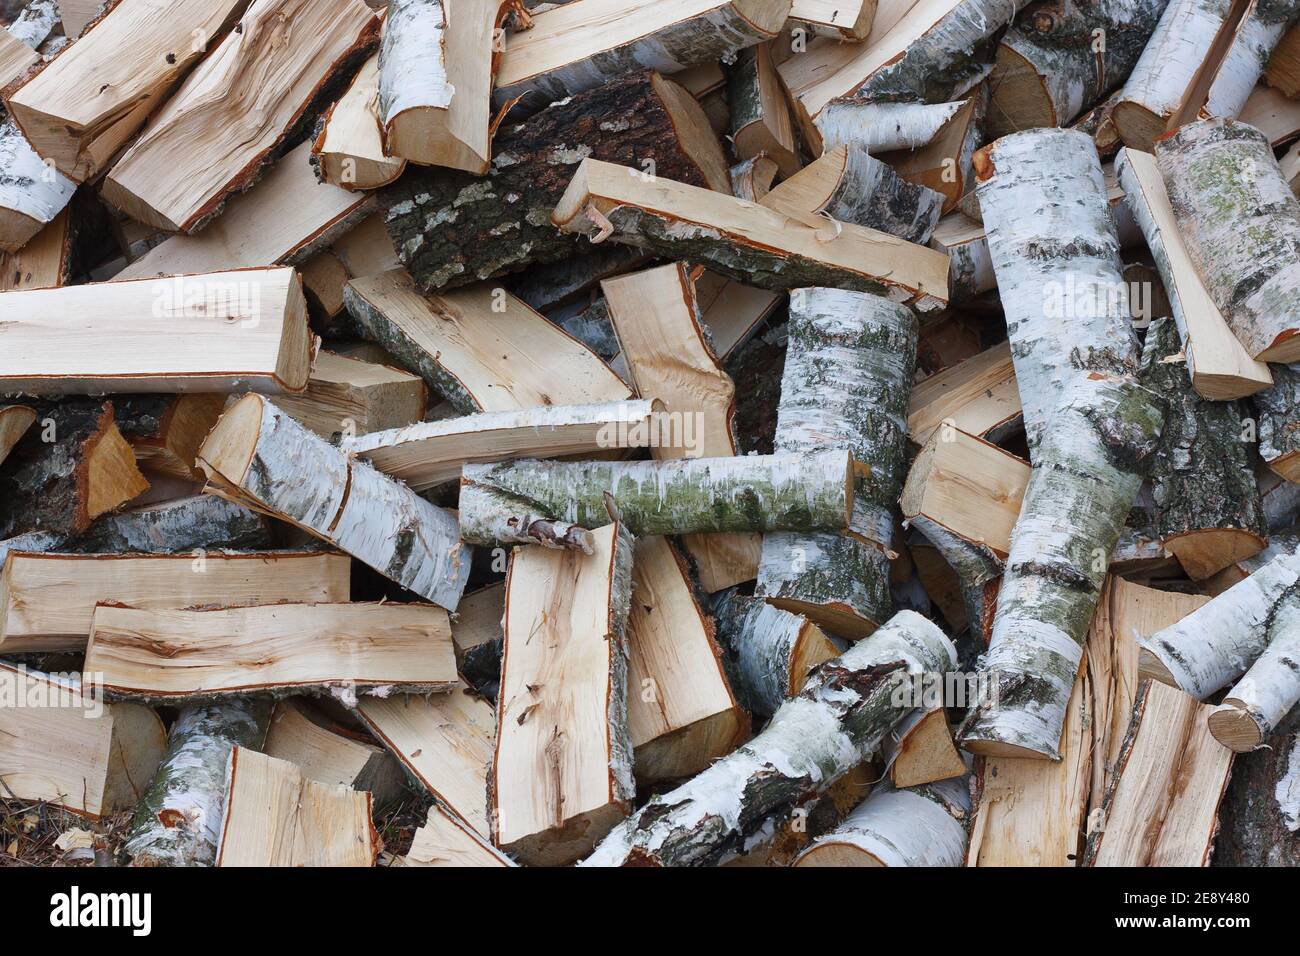 Birch wood pile. Wood for the fireplace Stock Photo